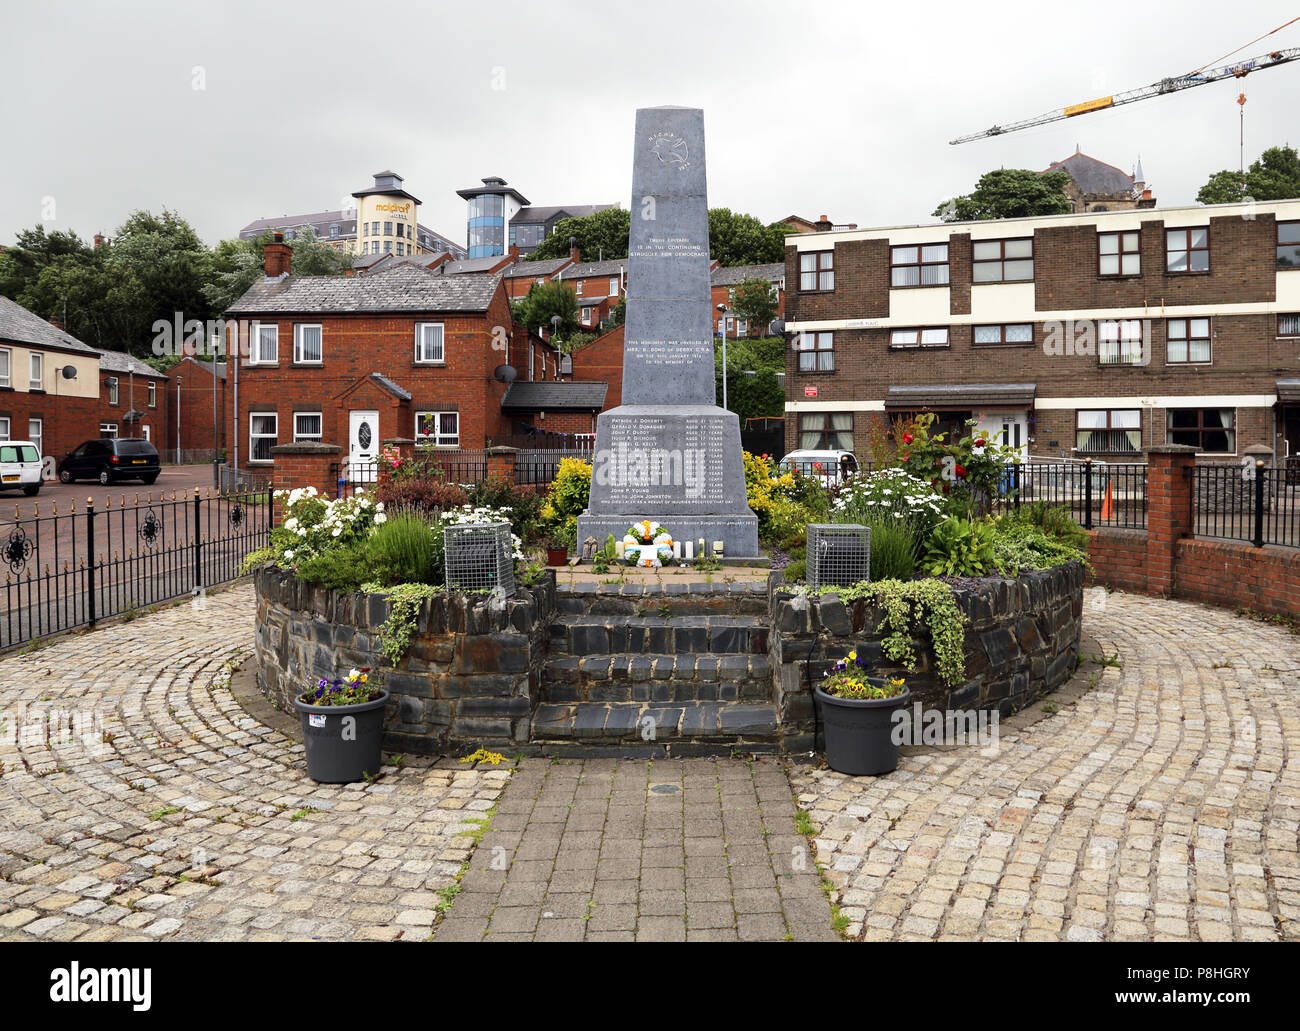 Monument memorializing the killing of 14 unarmed civilians by British troops on January 30, 1972 in the Bogside, Derry, Northern Ireland. Stock Photo